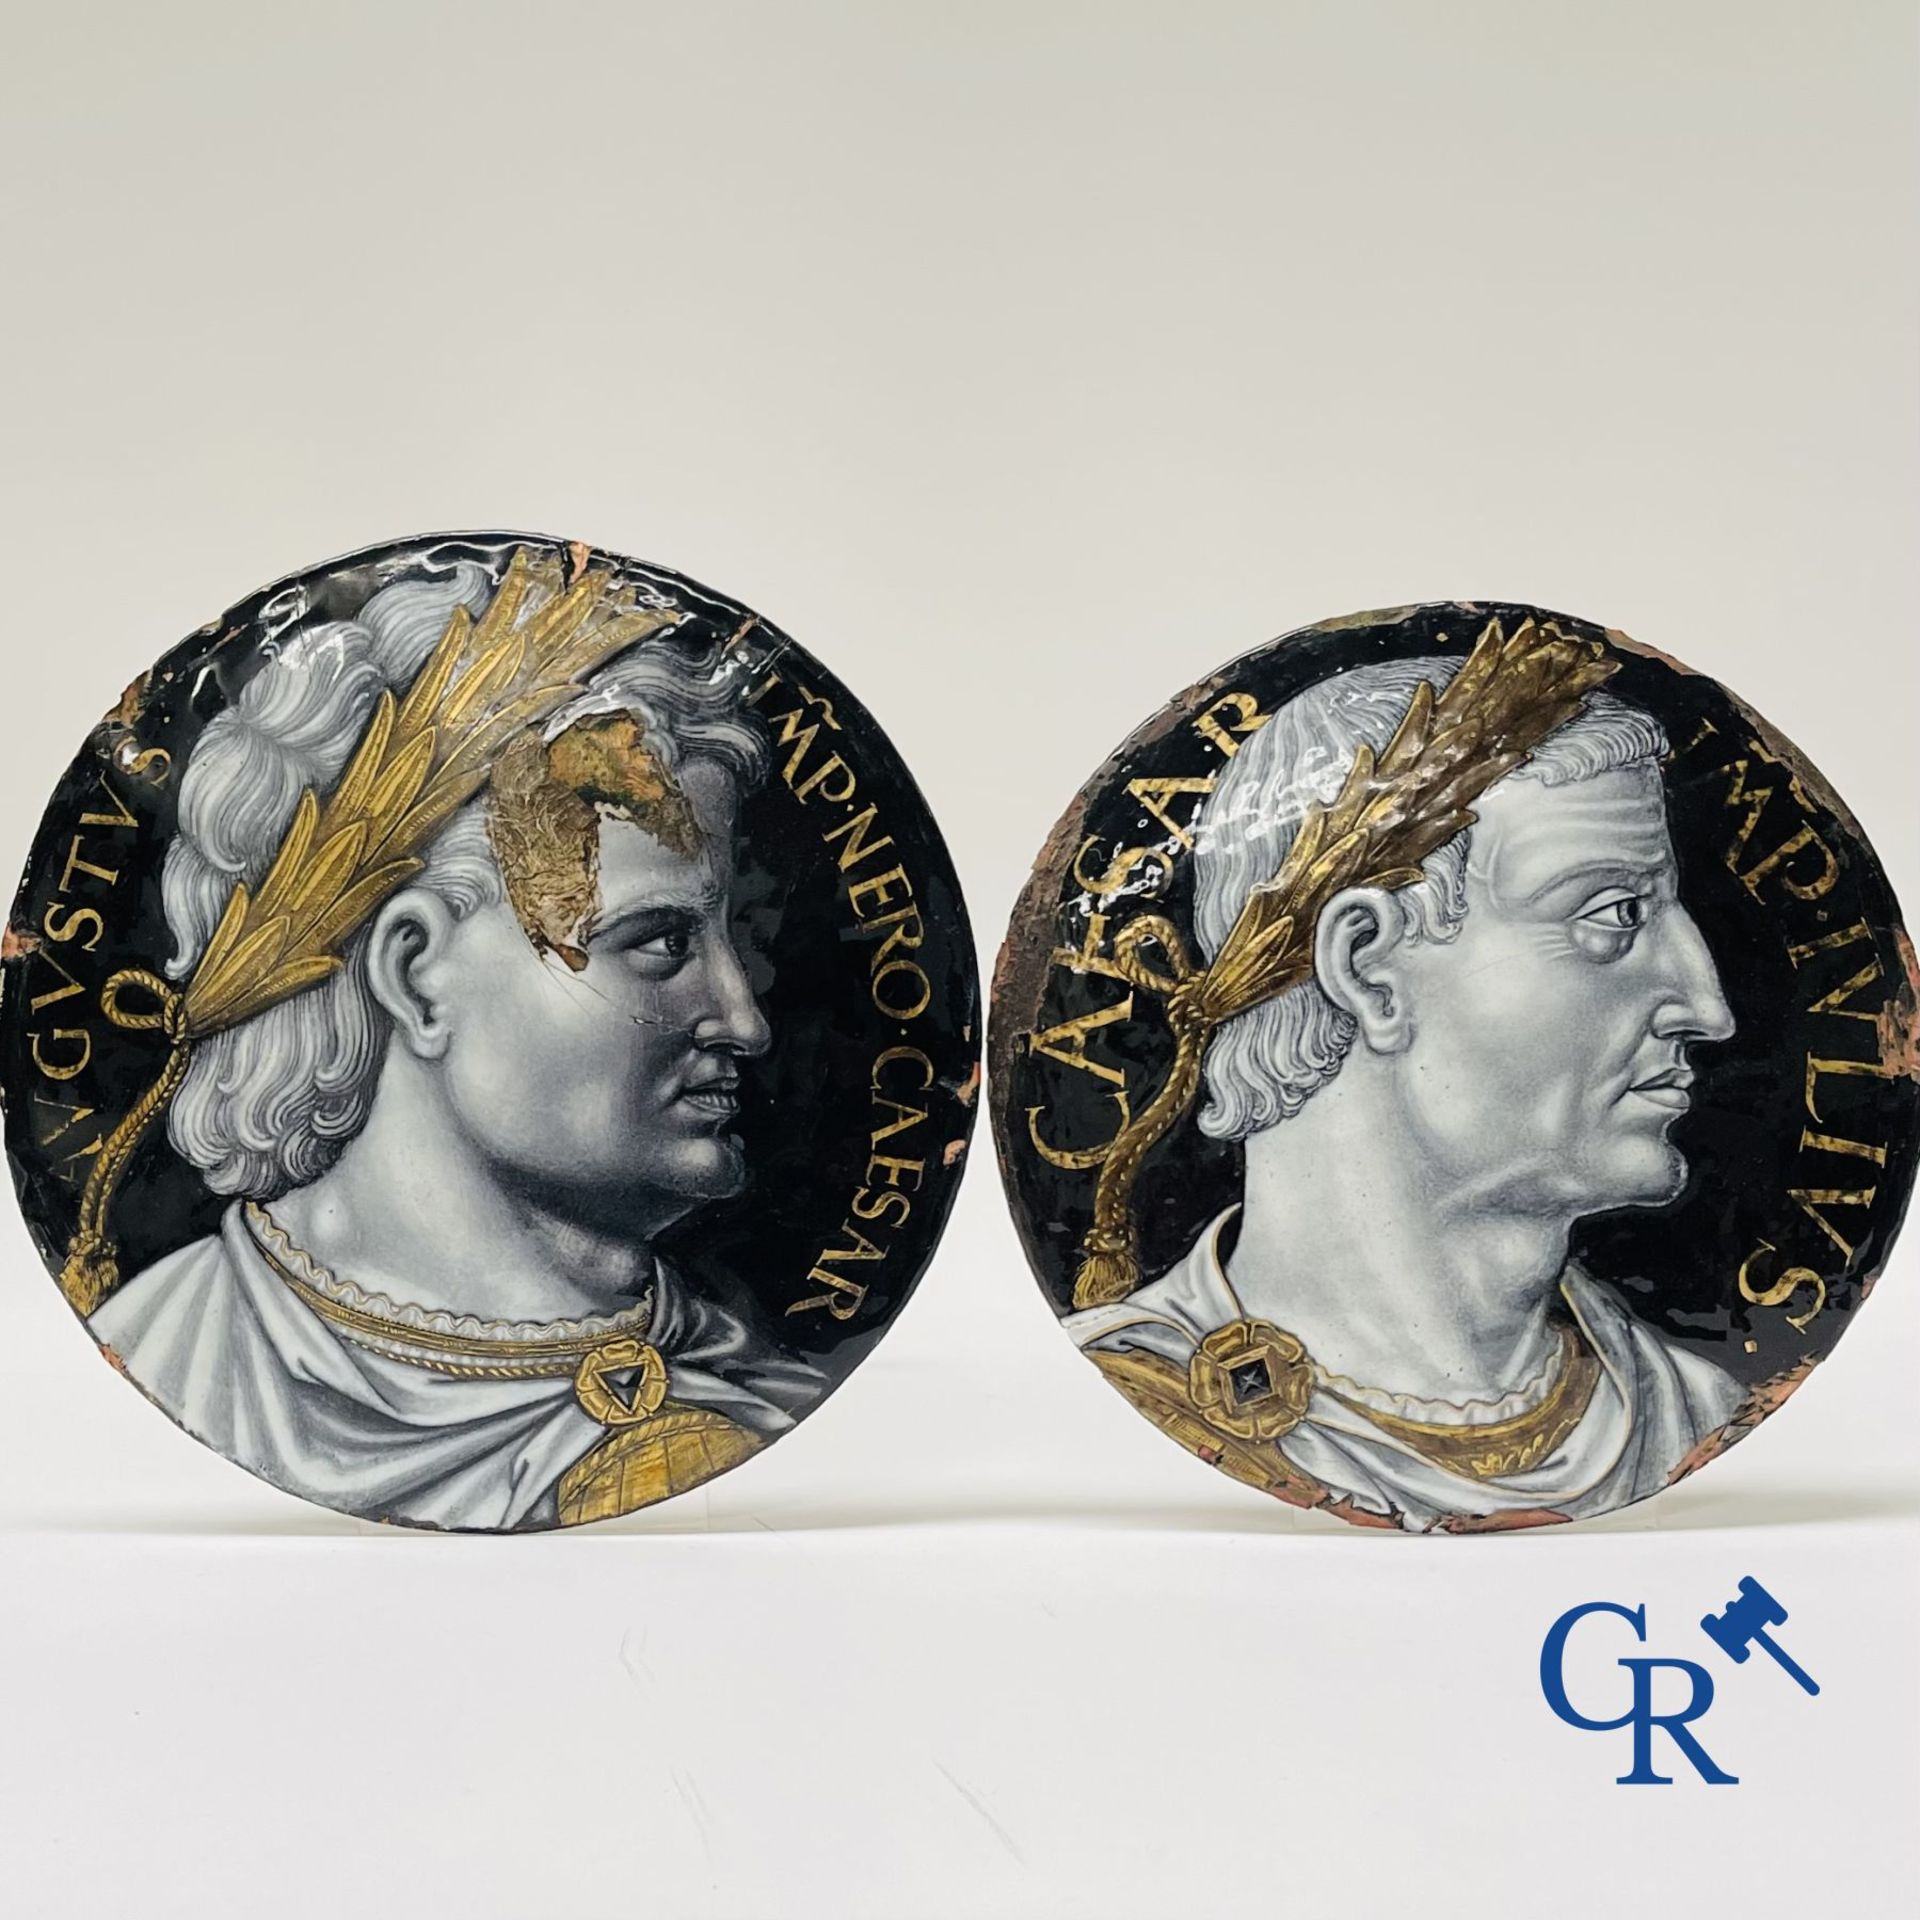 Limoges: In the manner of Jacques Laudin I. 2 medallions with the profile of Emperor Nero and Julius